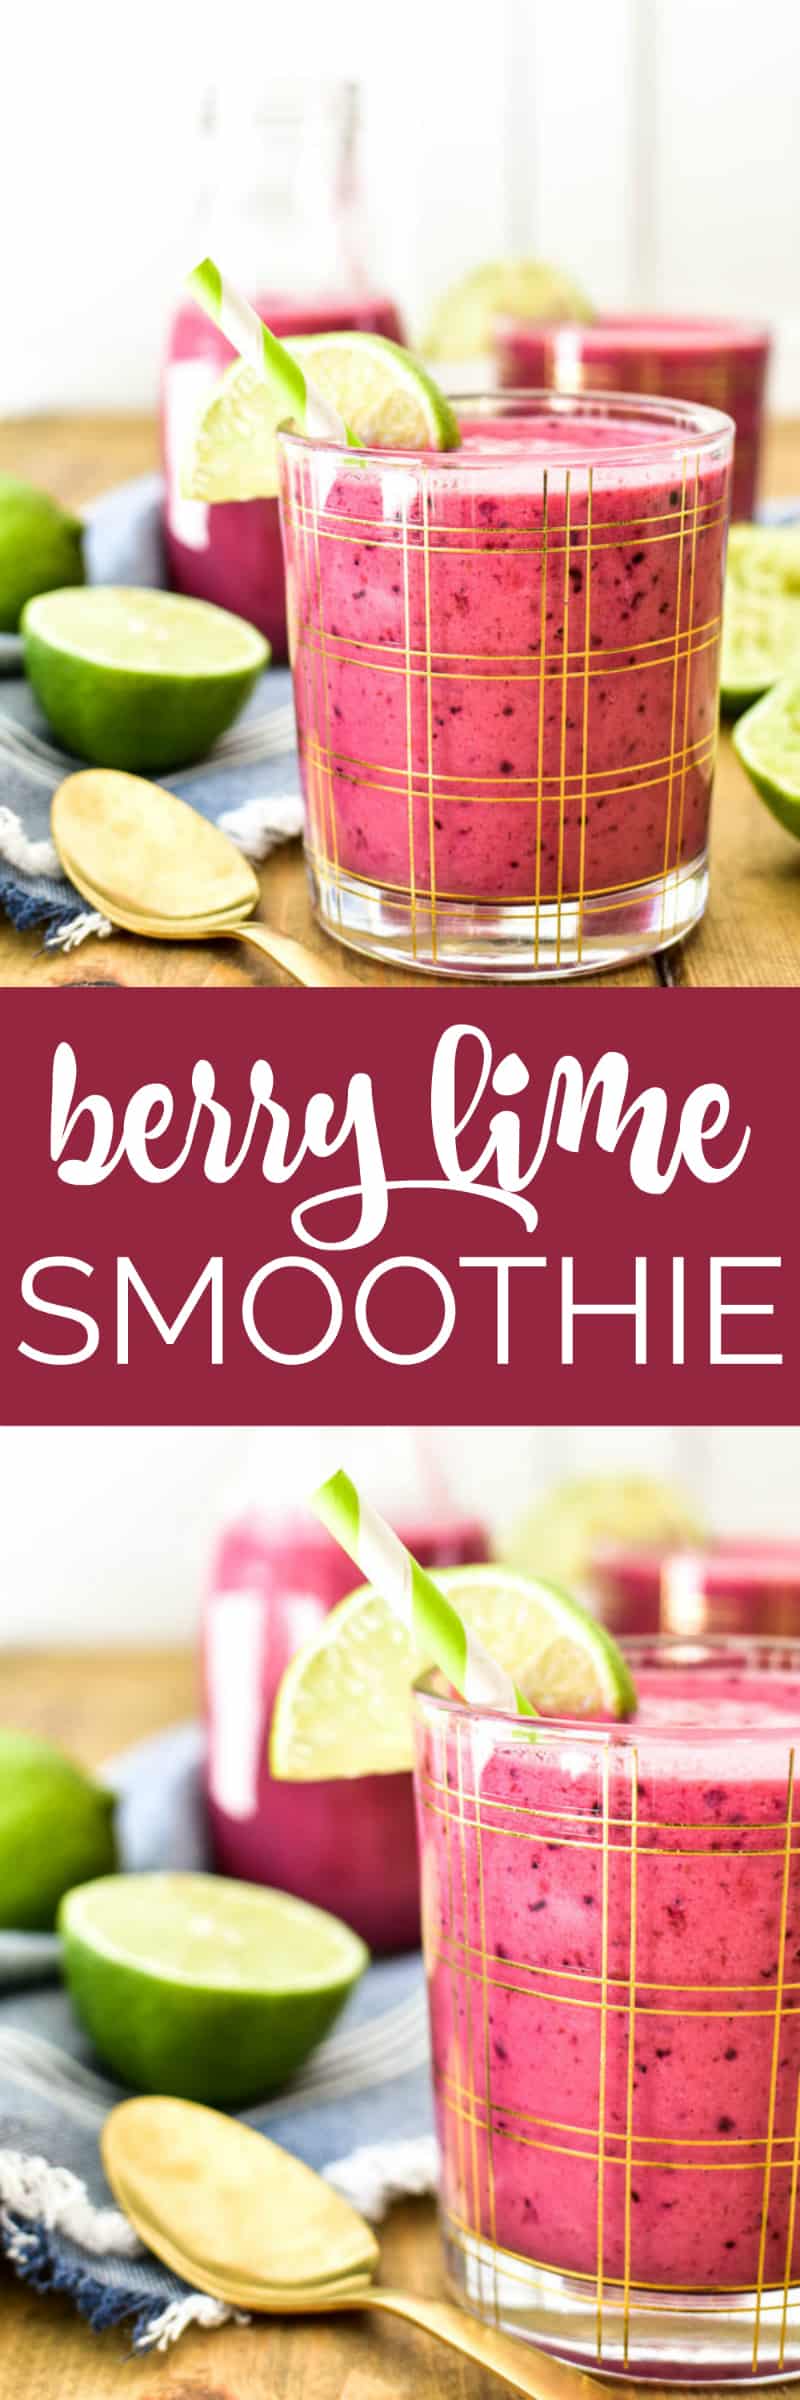 Collage image of Berry Lime Smoothie in a glass